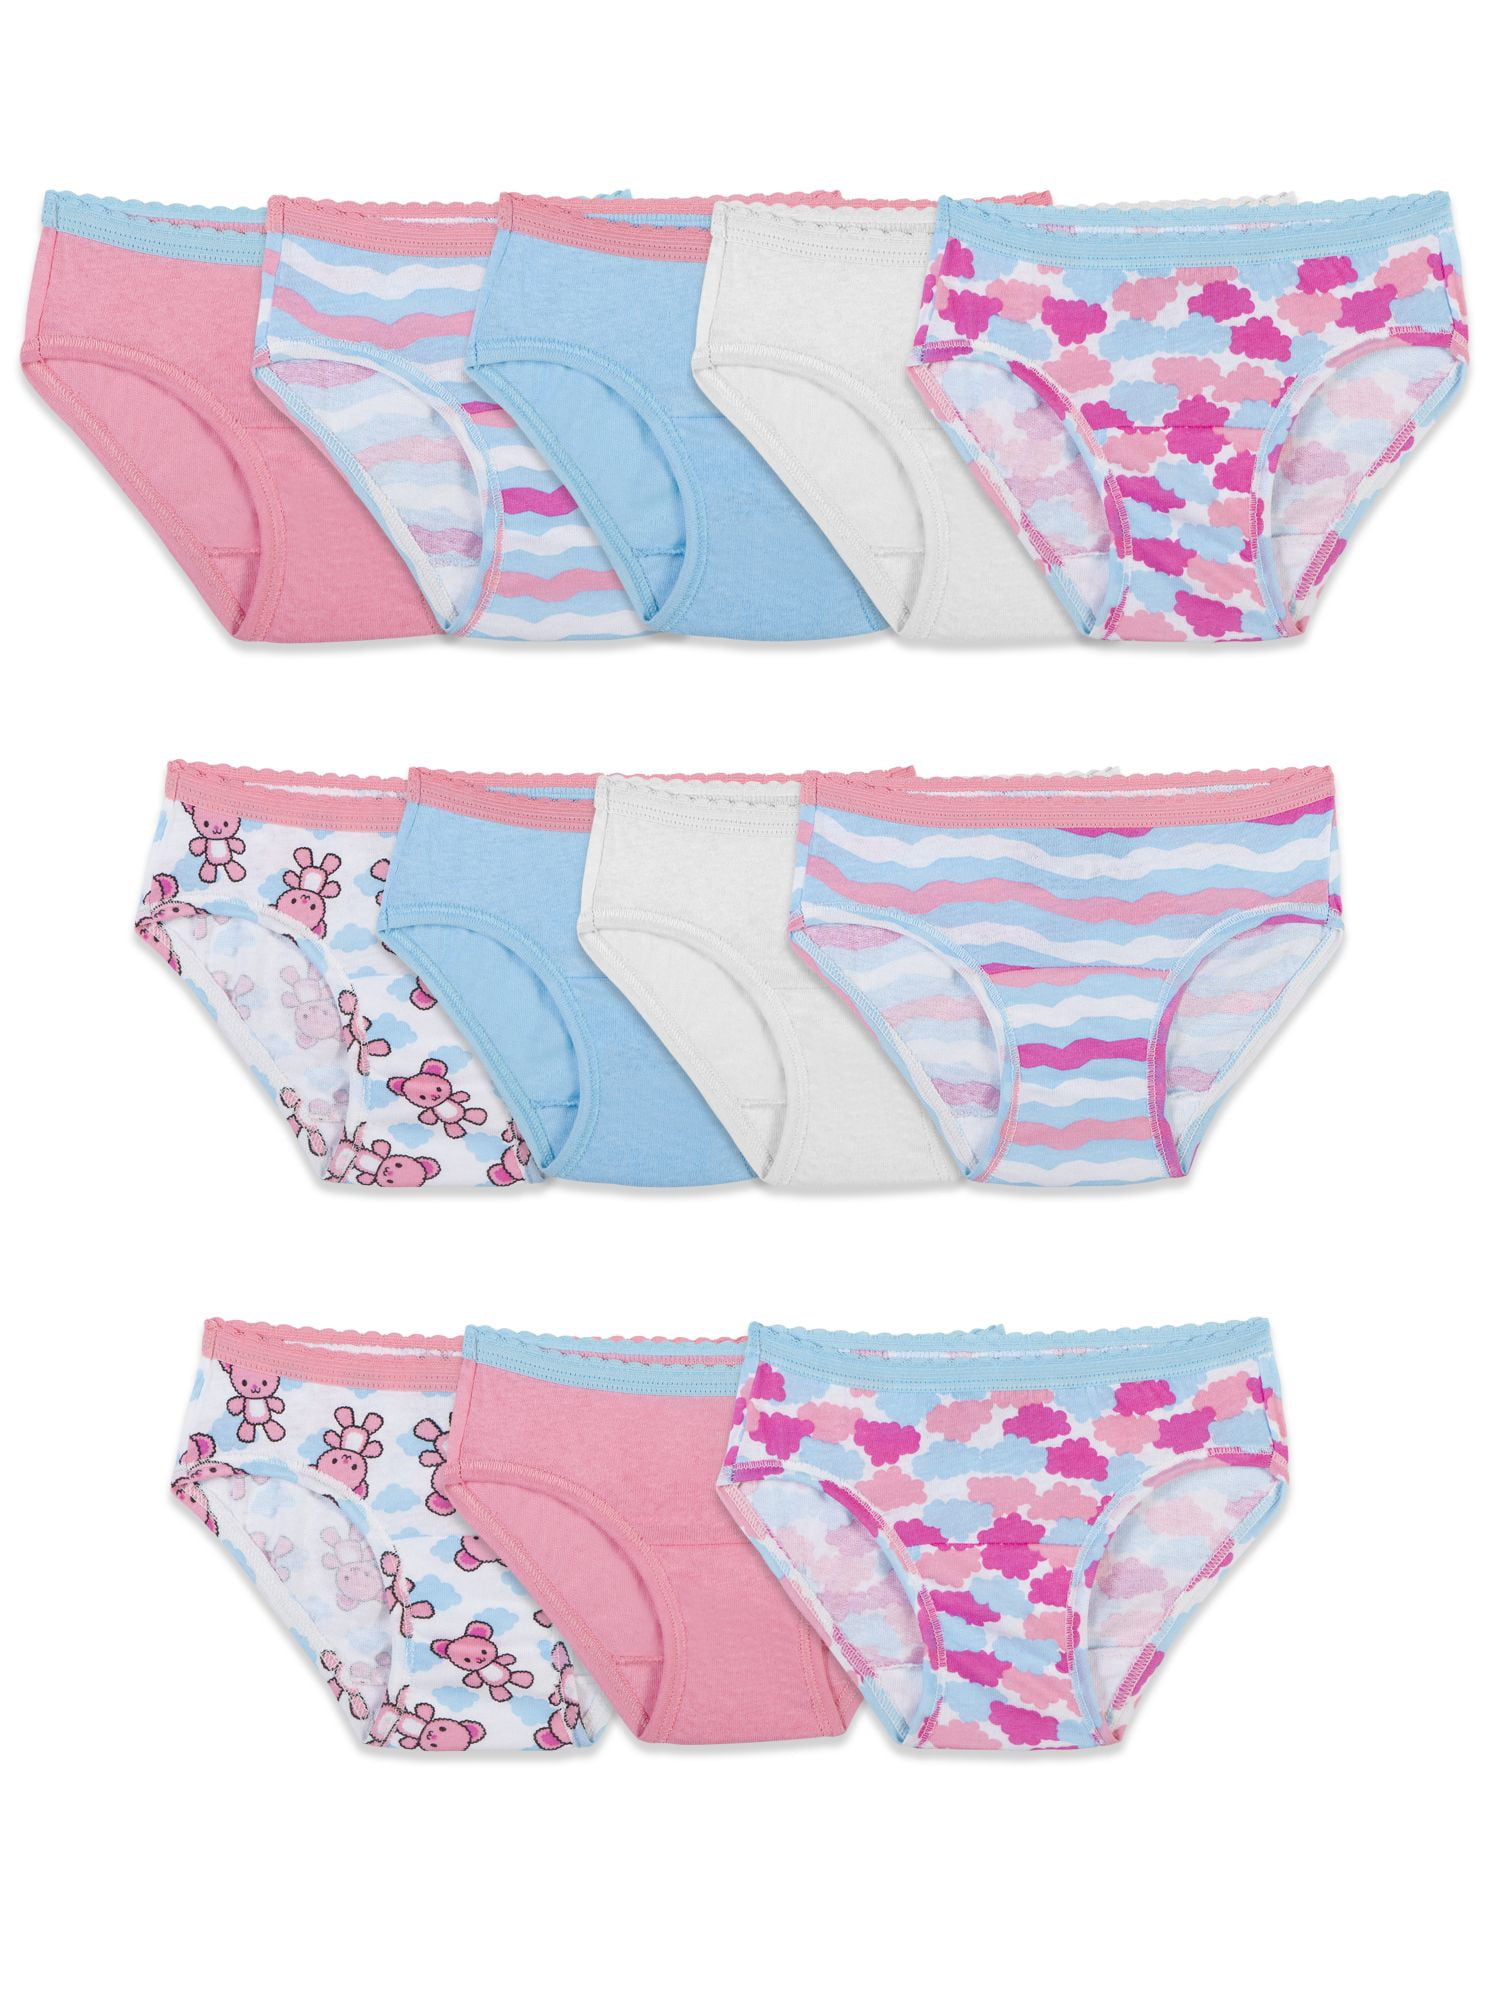 Fruit of the Loom Toddler Girl Hipster Underwear, 12 Pack, Sizes 2T-5T 